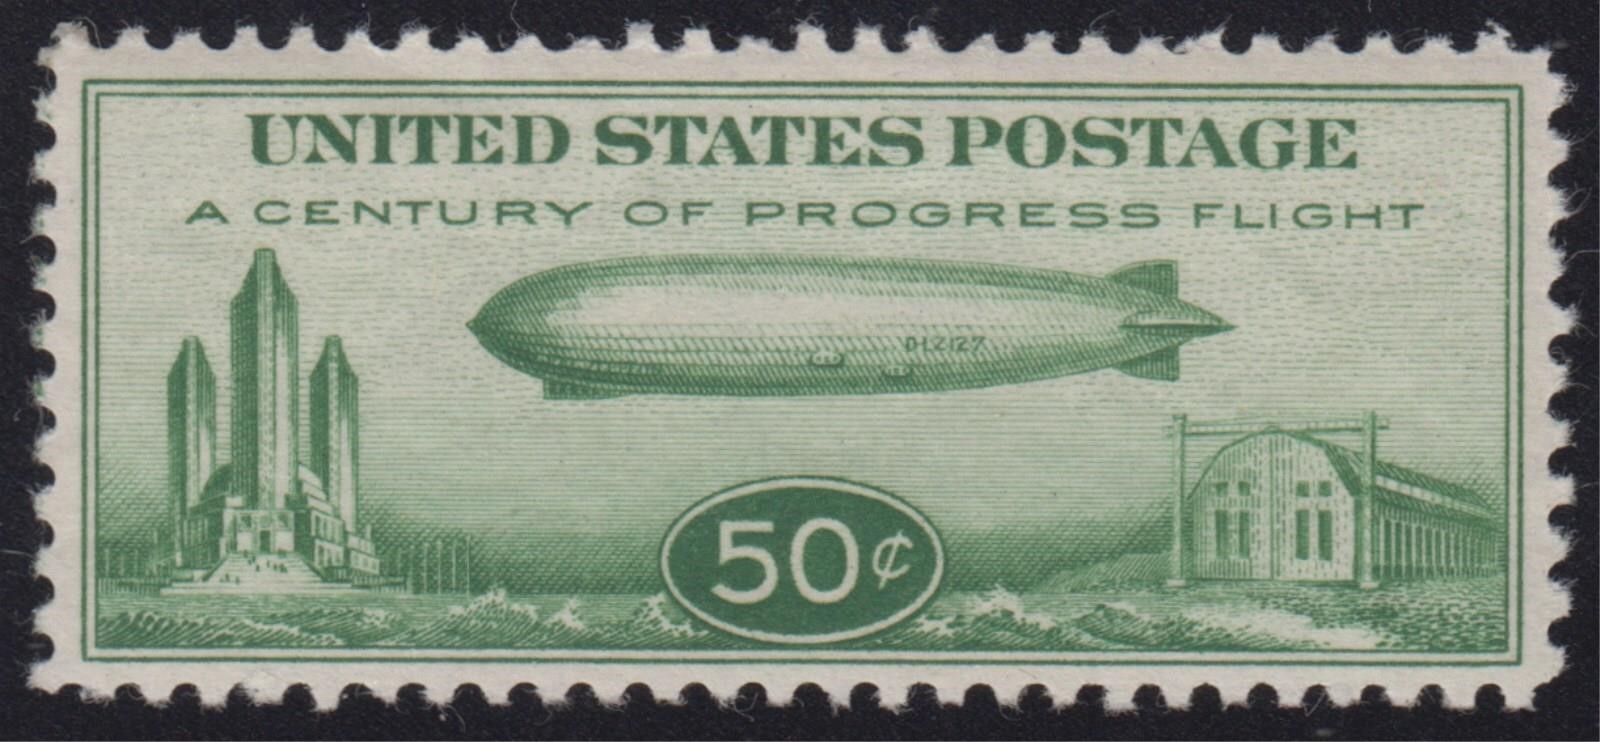 April 25th, 2021 Weekly Stamps & Collectibles Auction